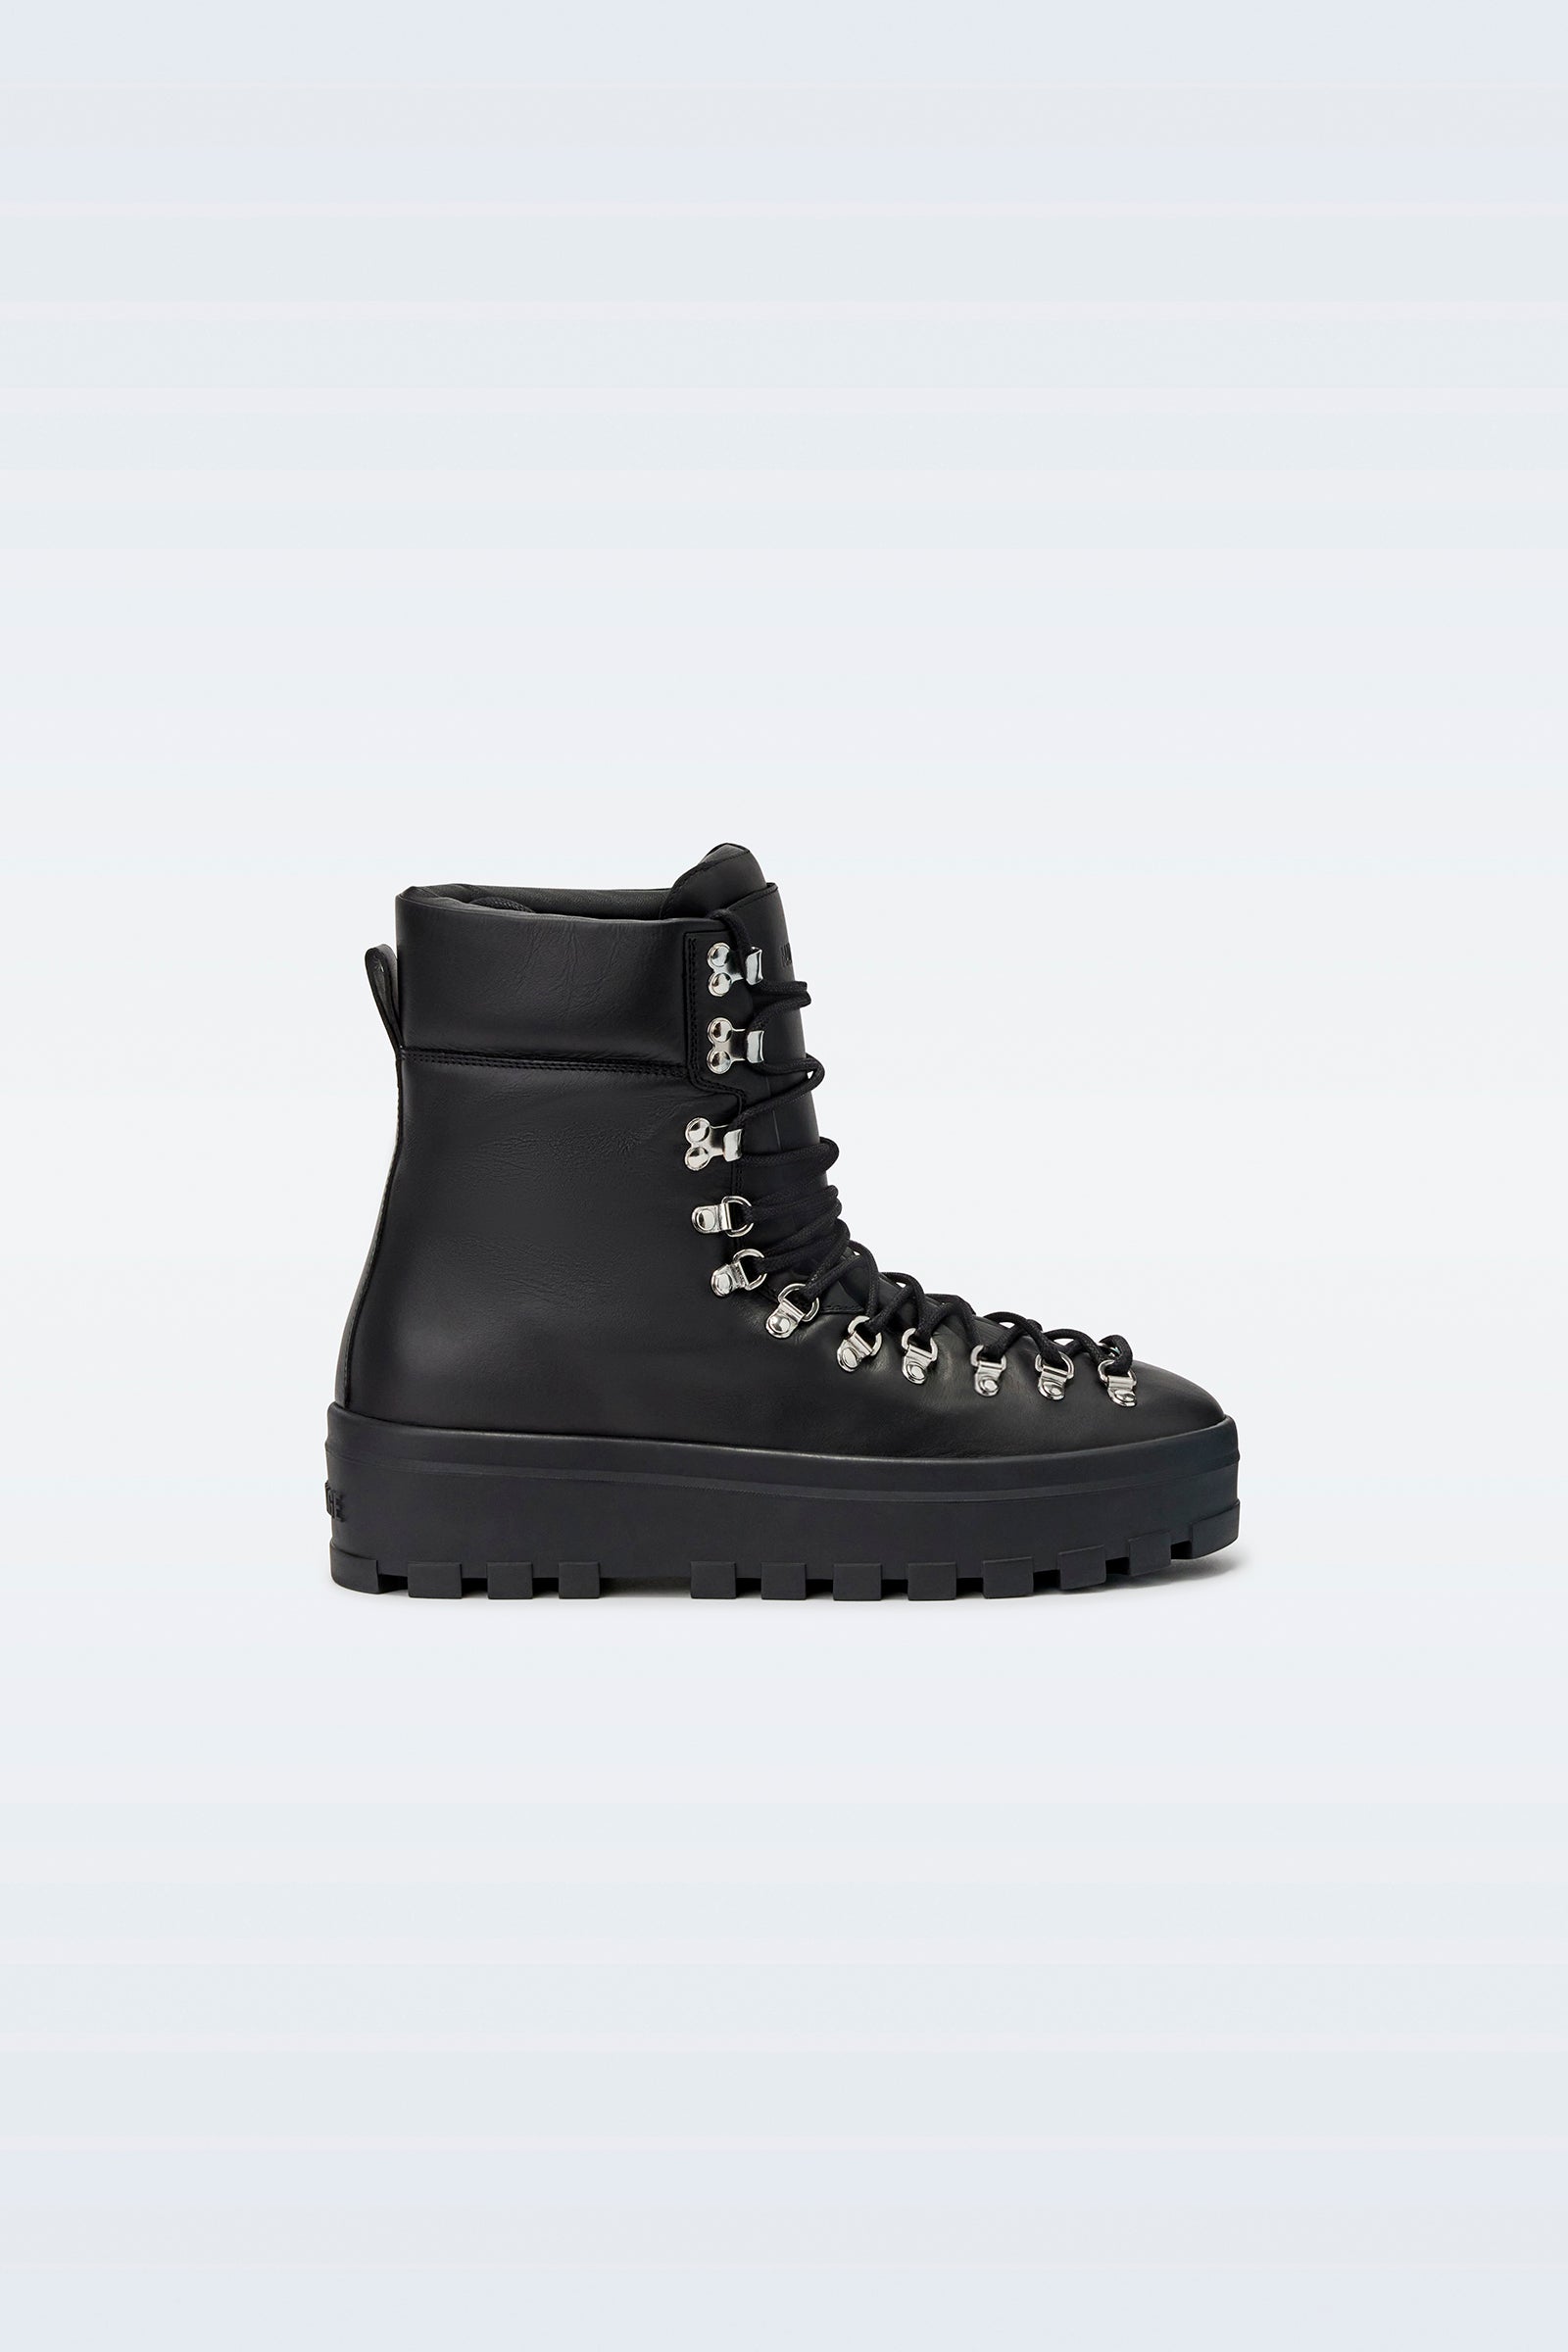 Off-White Black Hiker Boots